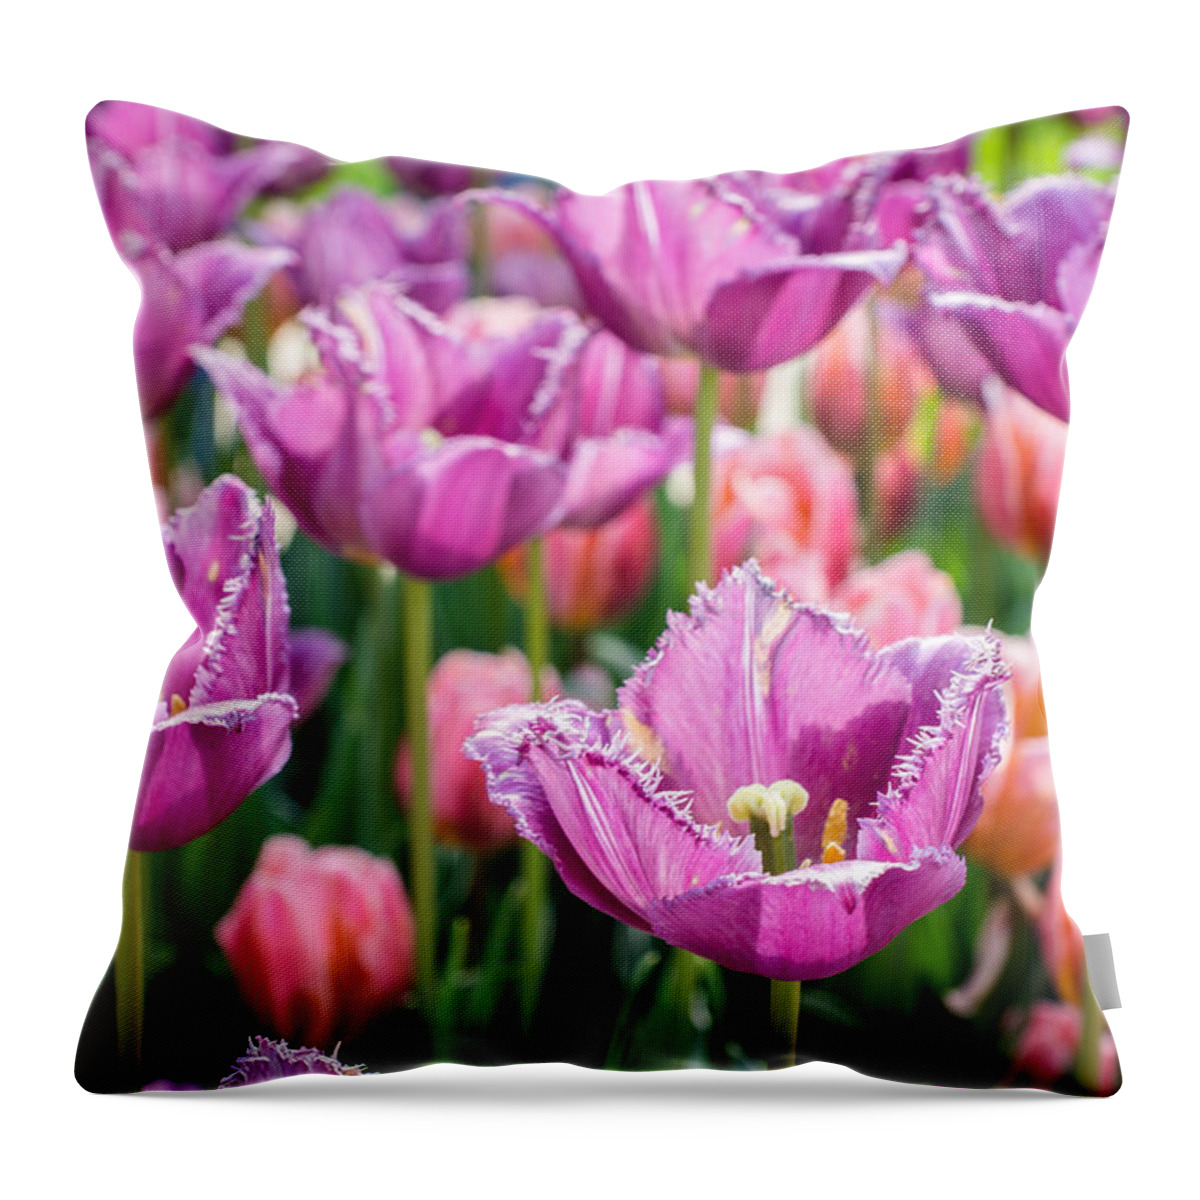 Purple Throw Pillow featuring the photograph Passionate Purples by Bill Pevlor